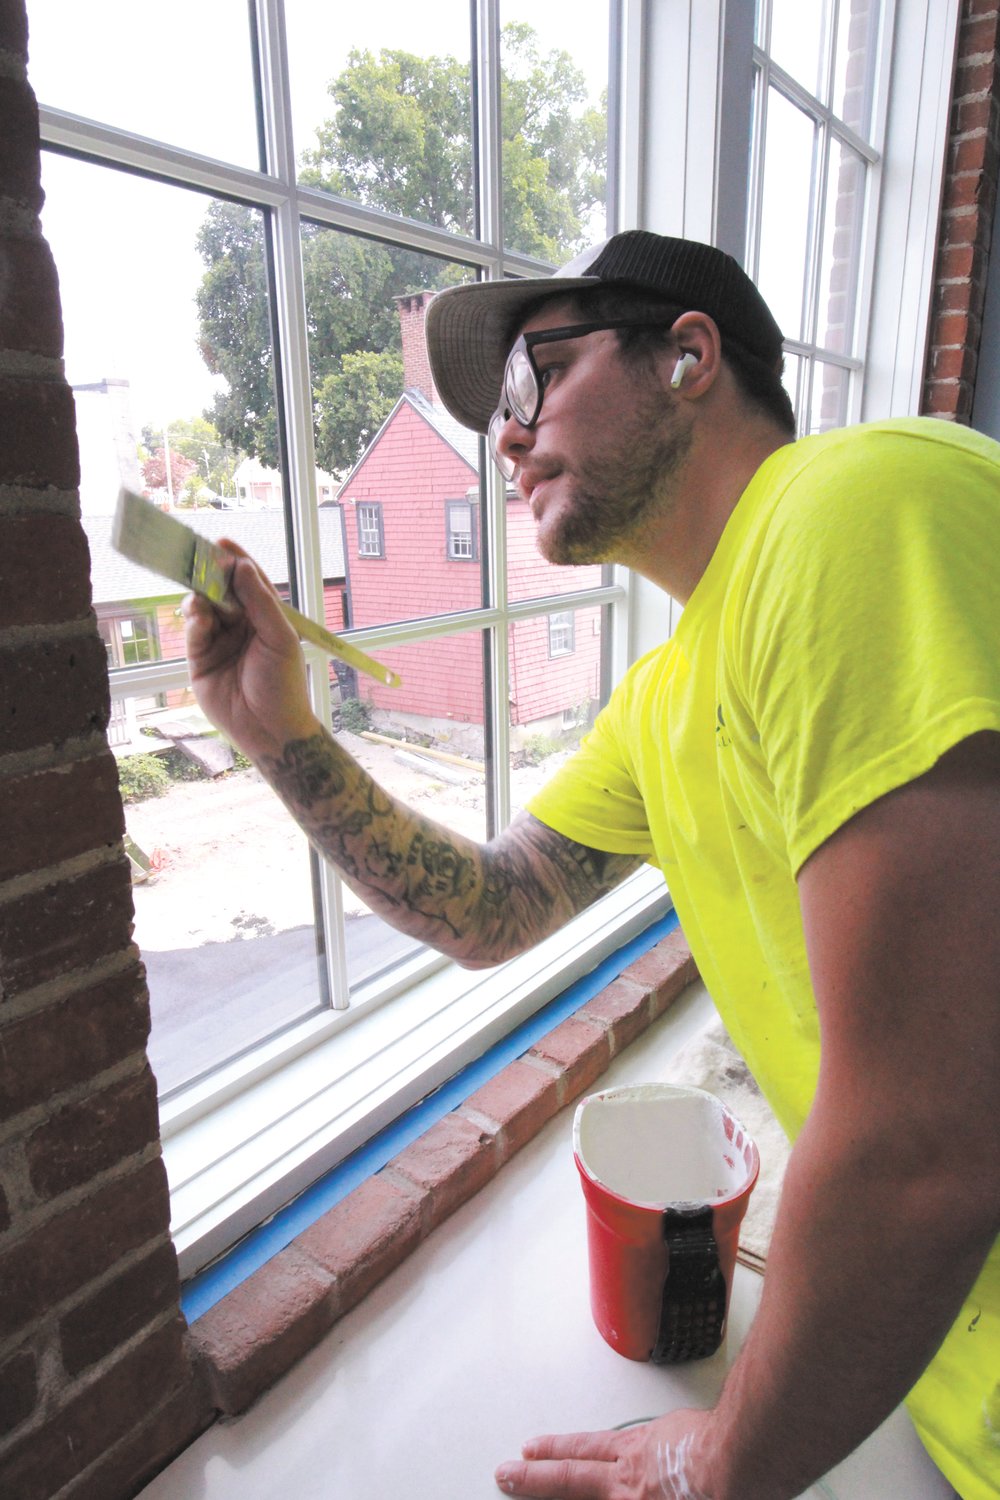 TOUCH UP: Jared Anderson of Coastal Glazing gives a window frame a final coat of paint.